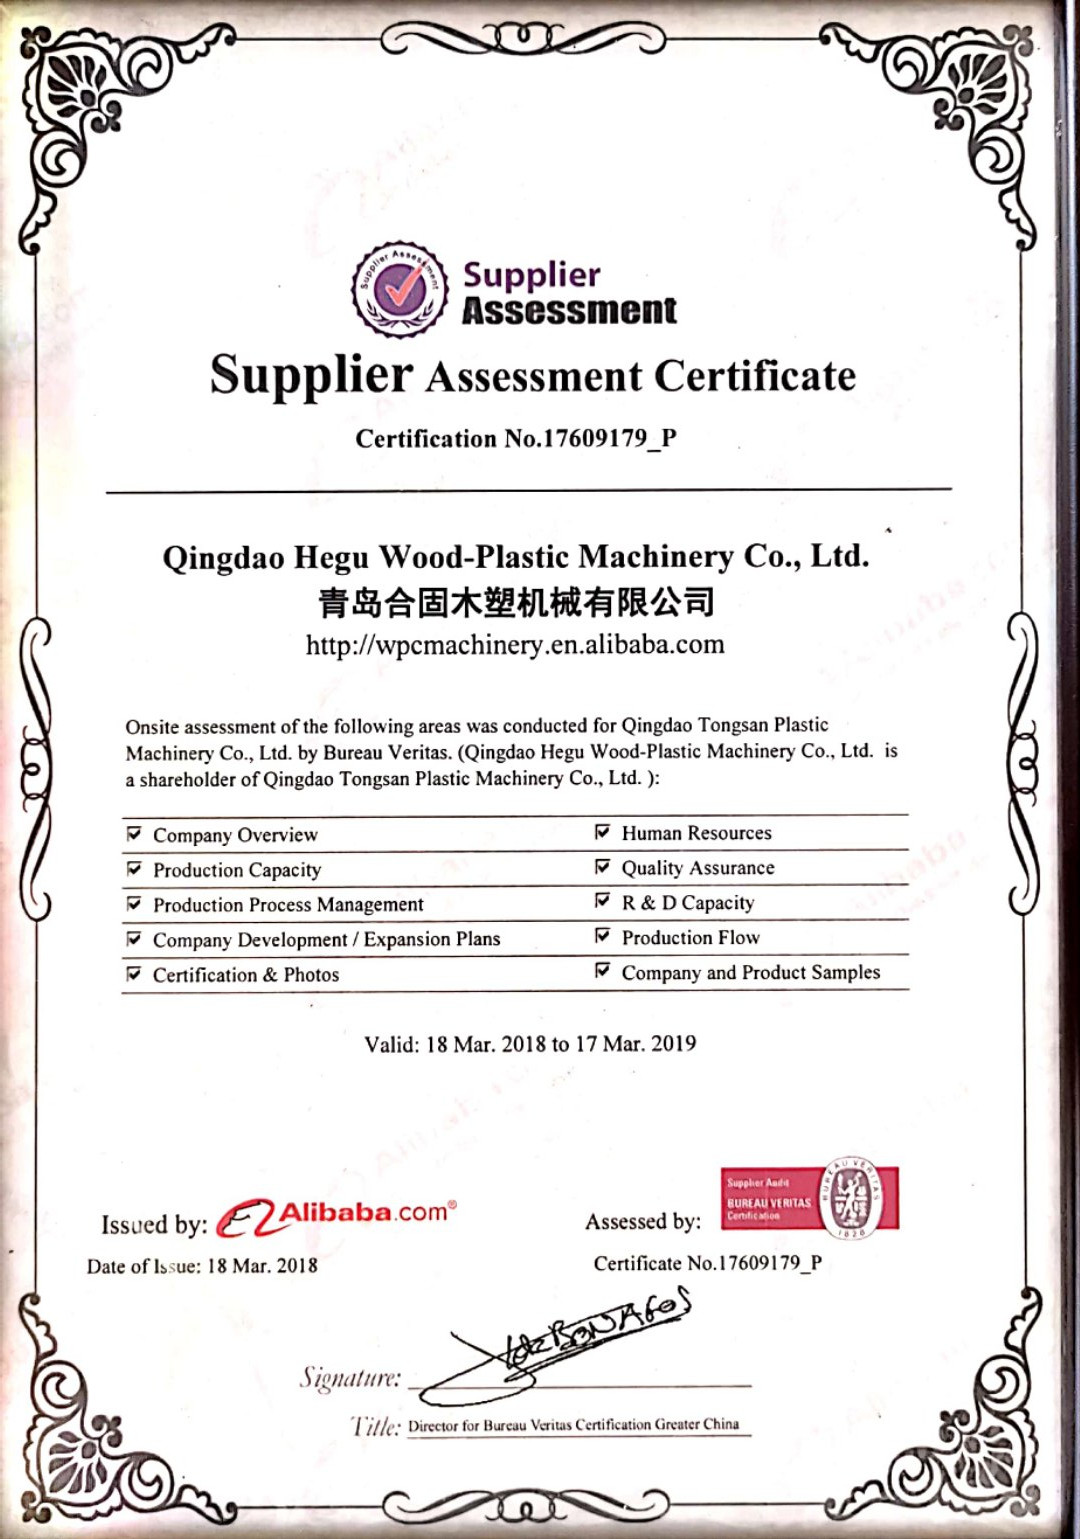 Supplier Assessment Certificate by Alibaba